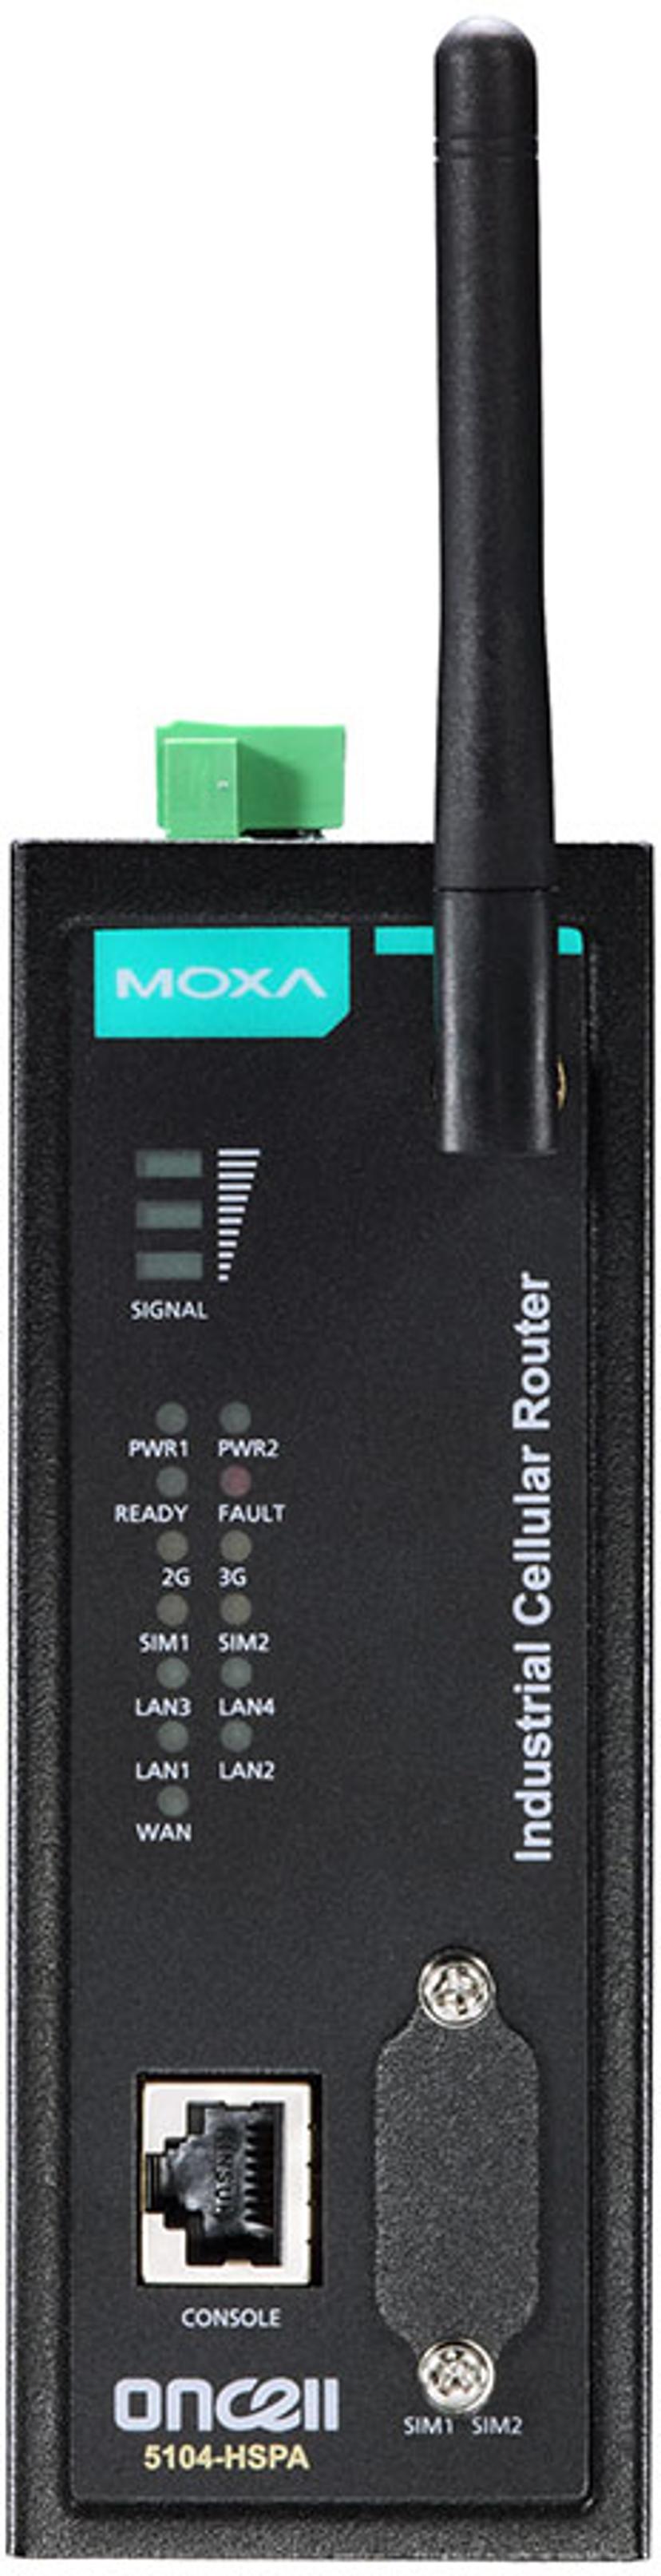 Moxa OnCell 5104-HSPA Industriell 4G Router Extrem Temp